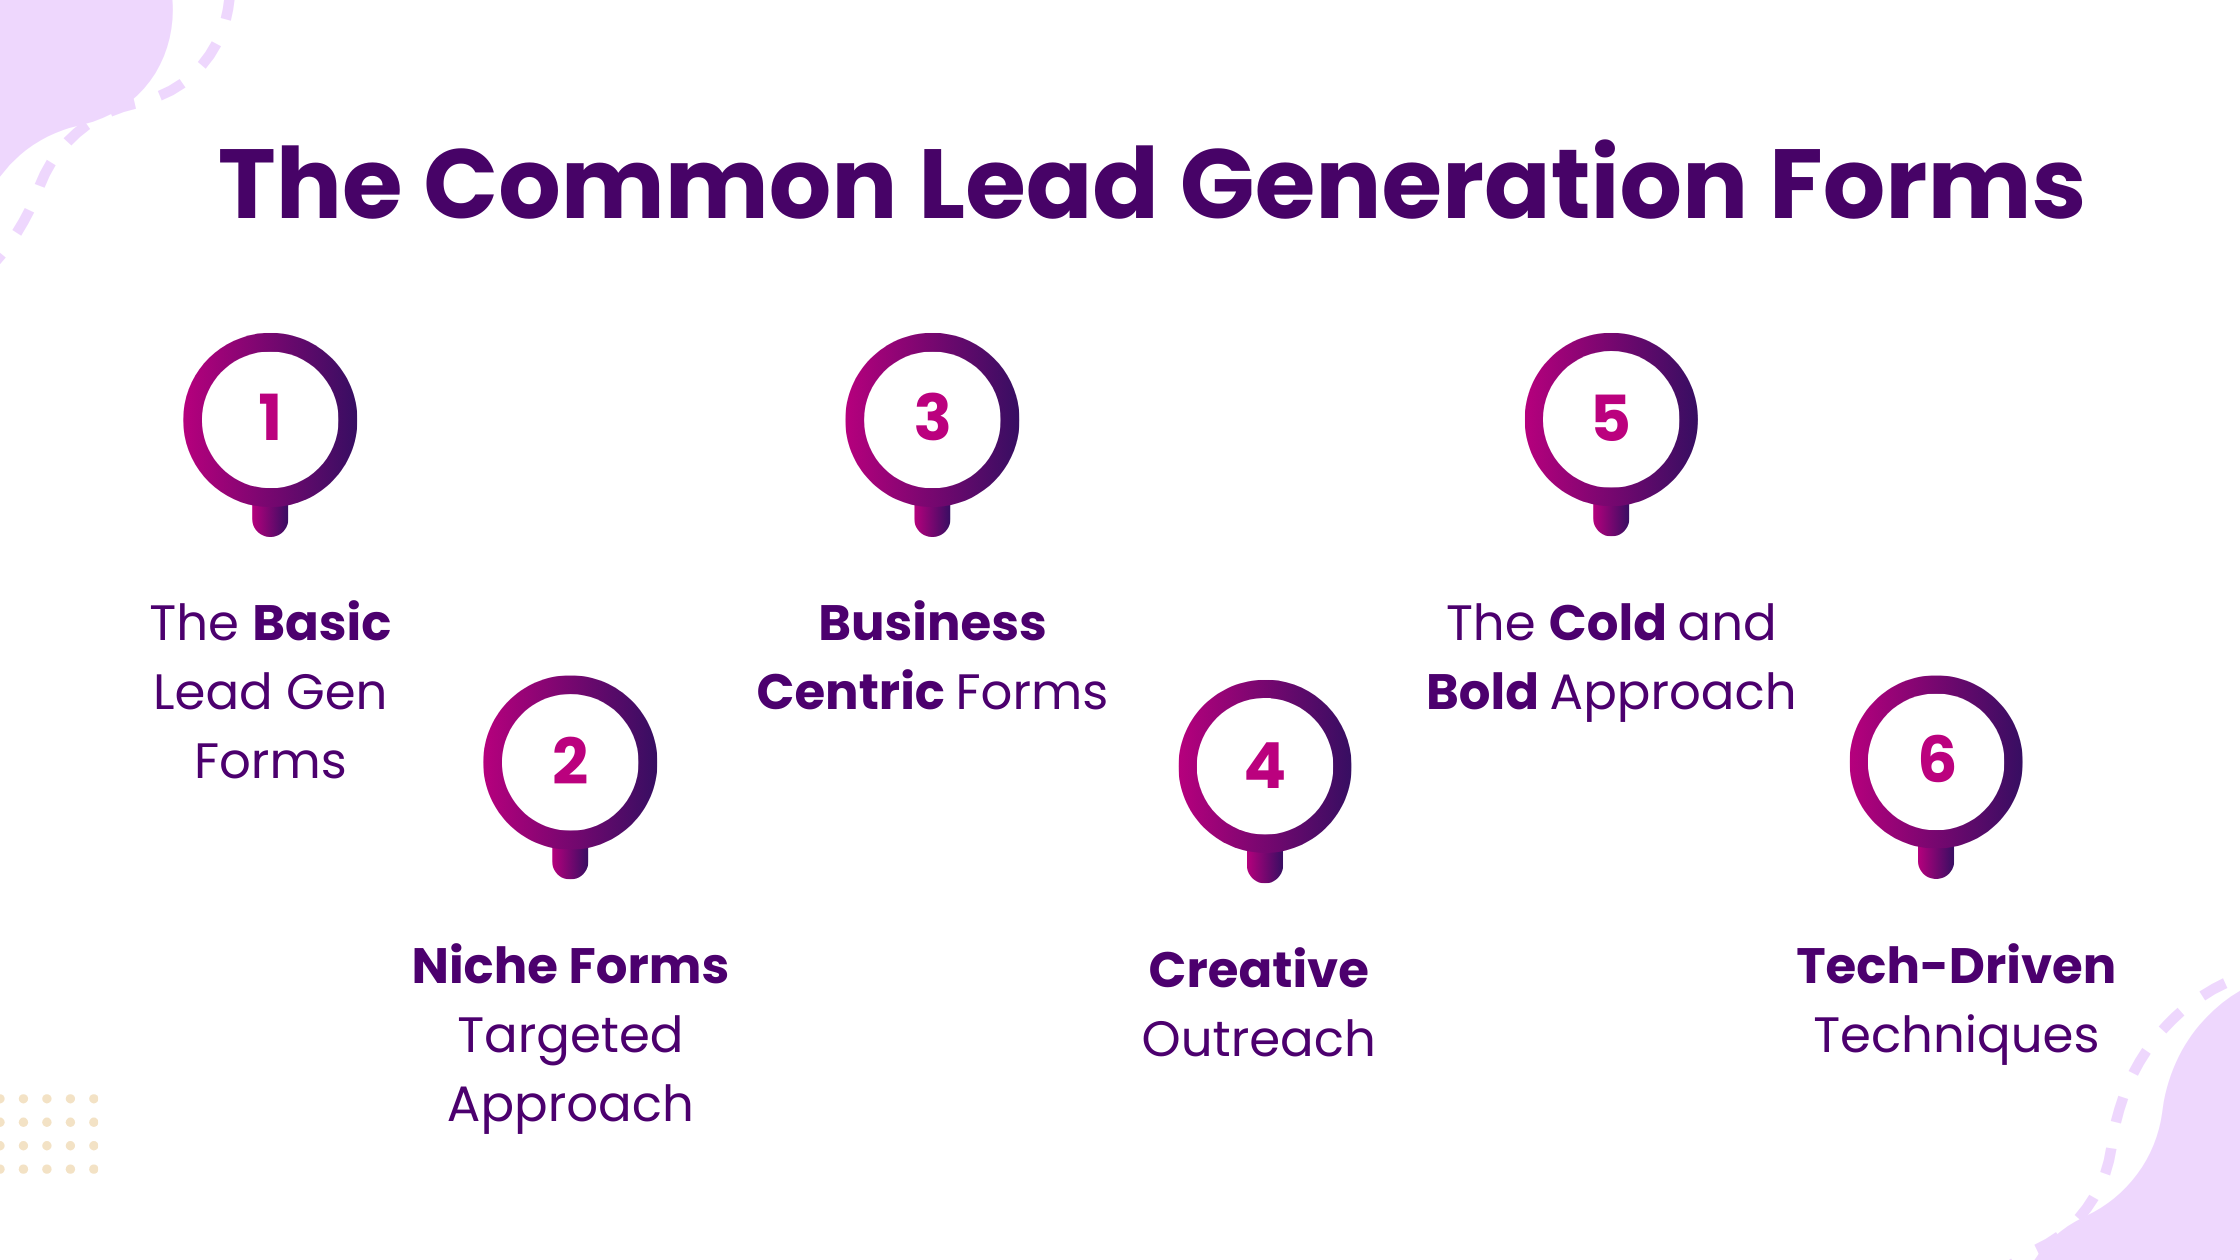 The Common Lead Generation Forms